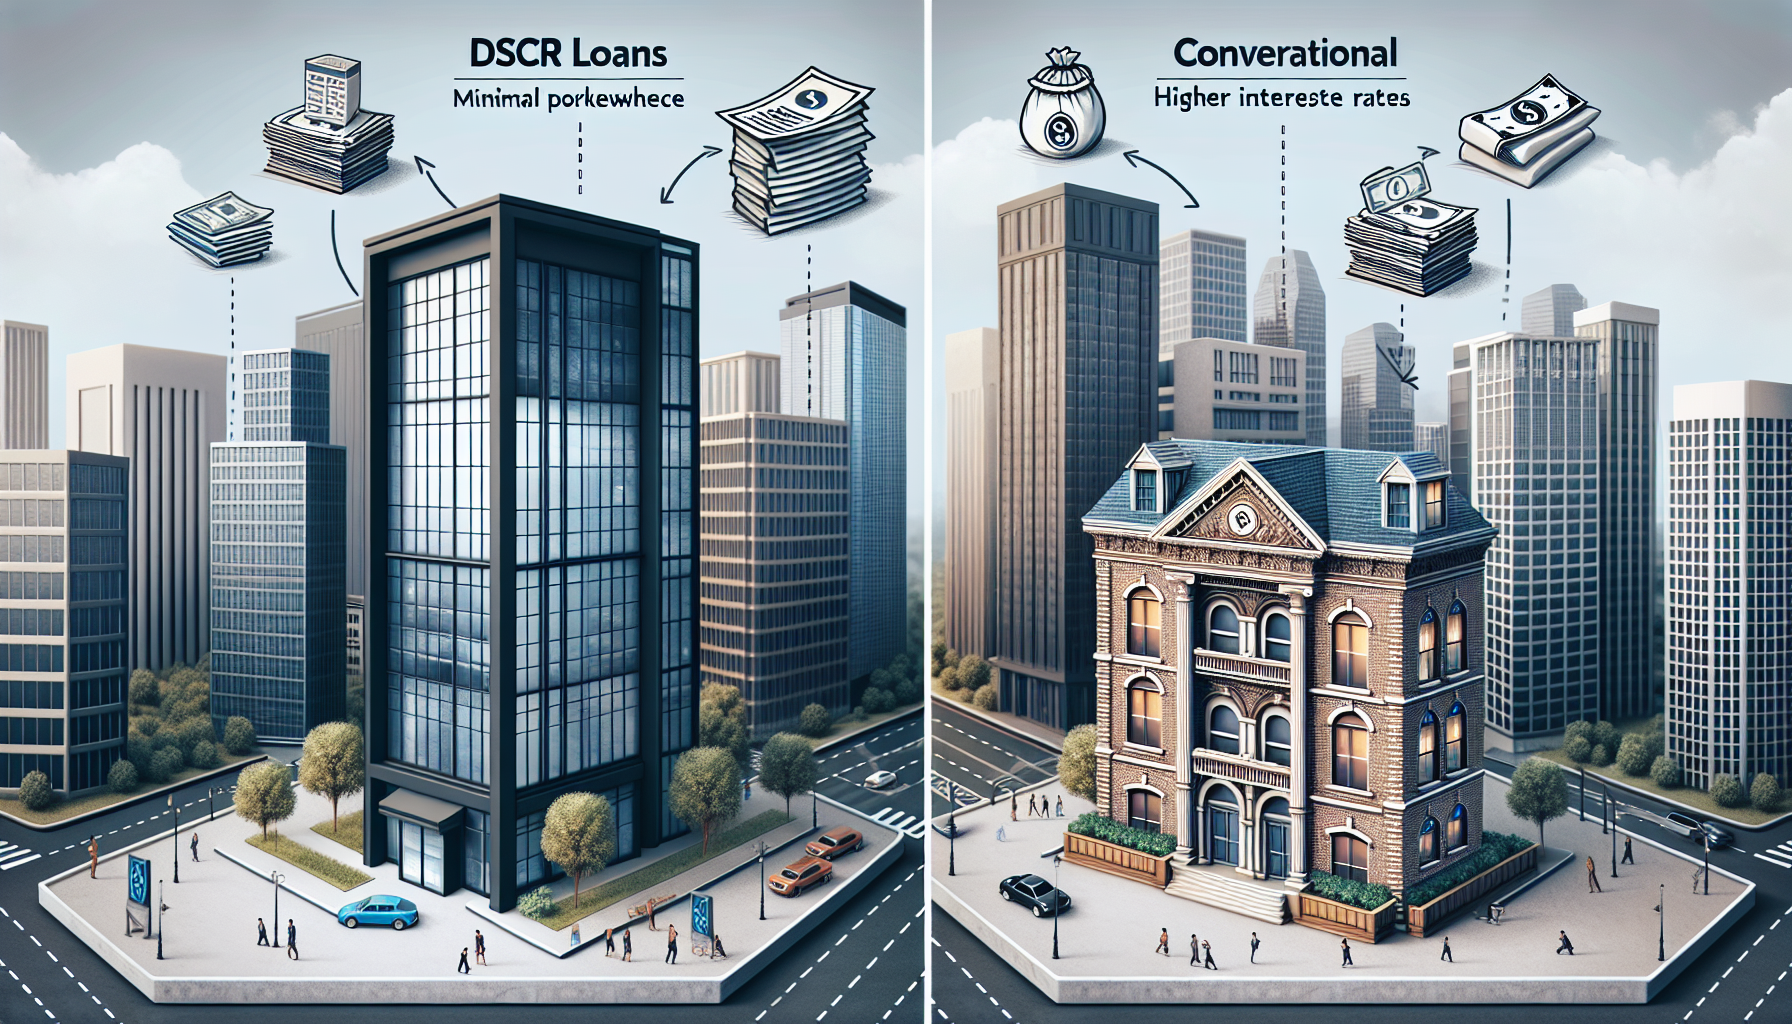 Illustration comparing DSCR loans and conventional mortgages